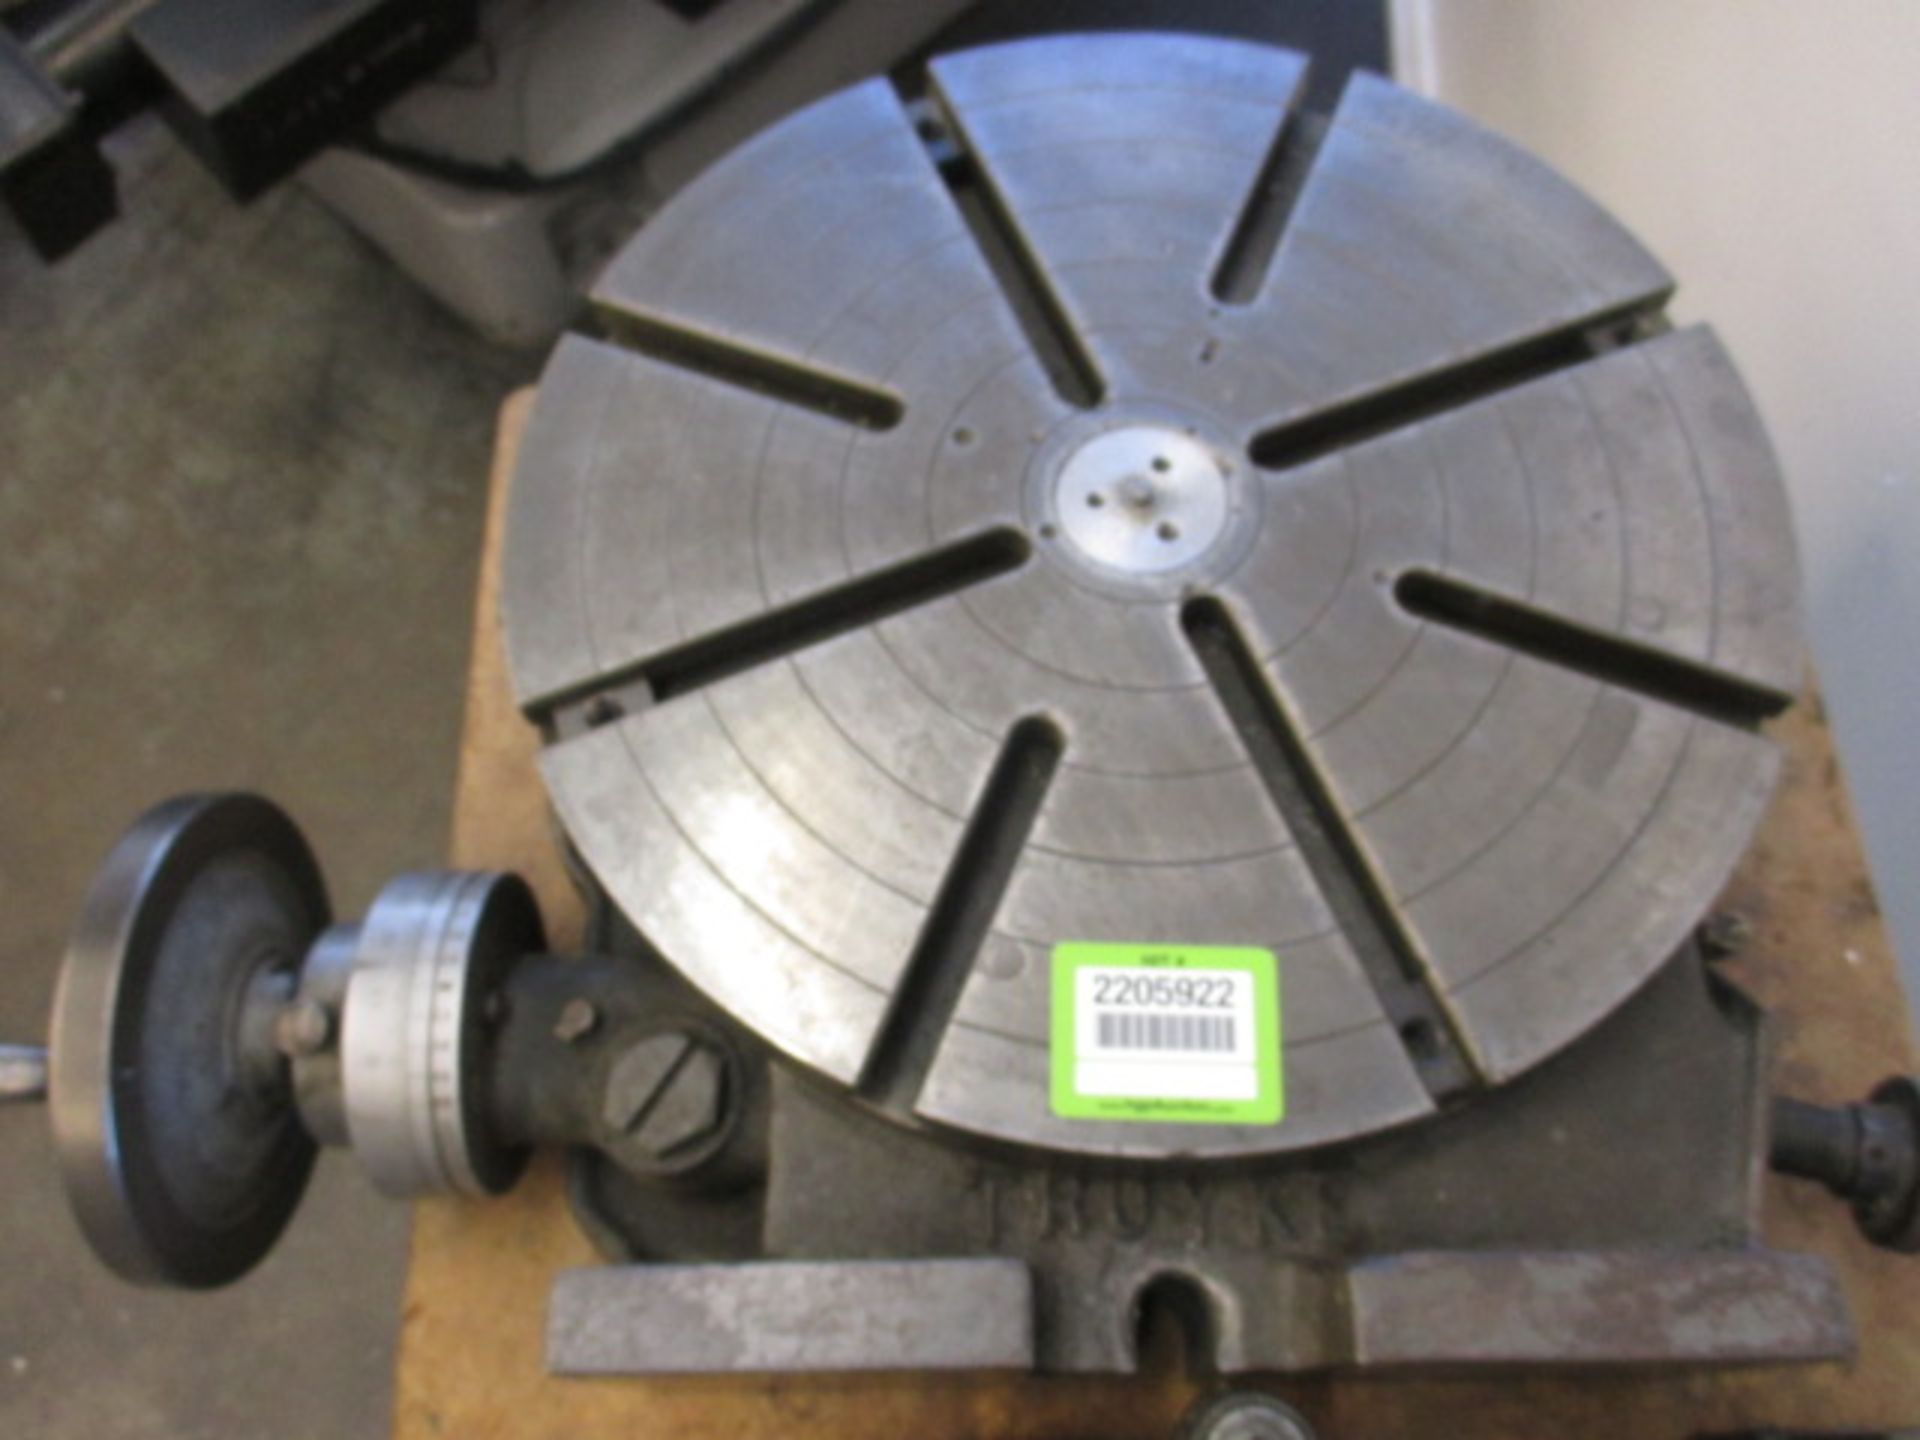 Rotary Table. Troyke 15" Vertical Rotary Table. HIT# 2205922. Main Room. Asset Located at 859 Ward